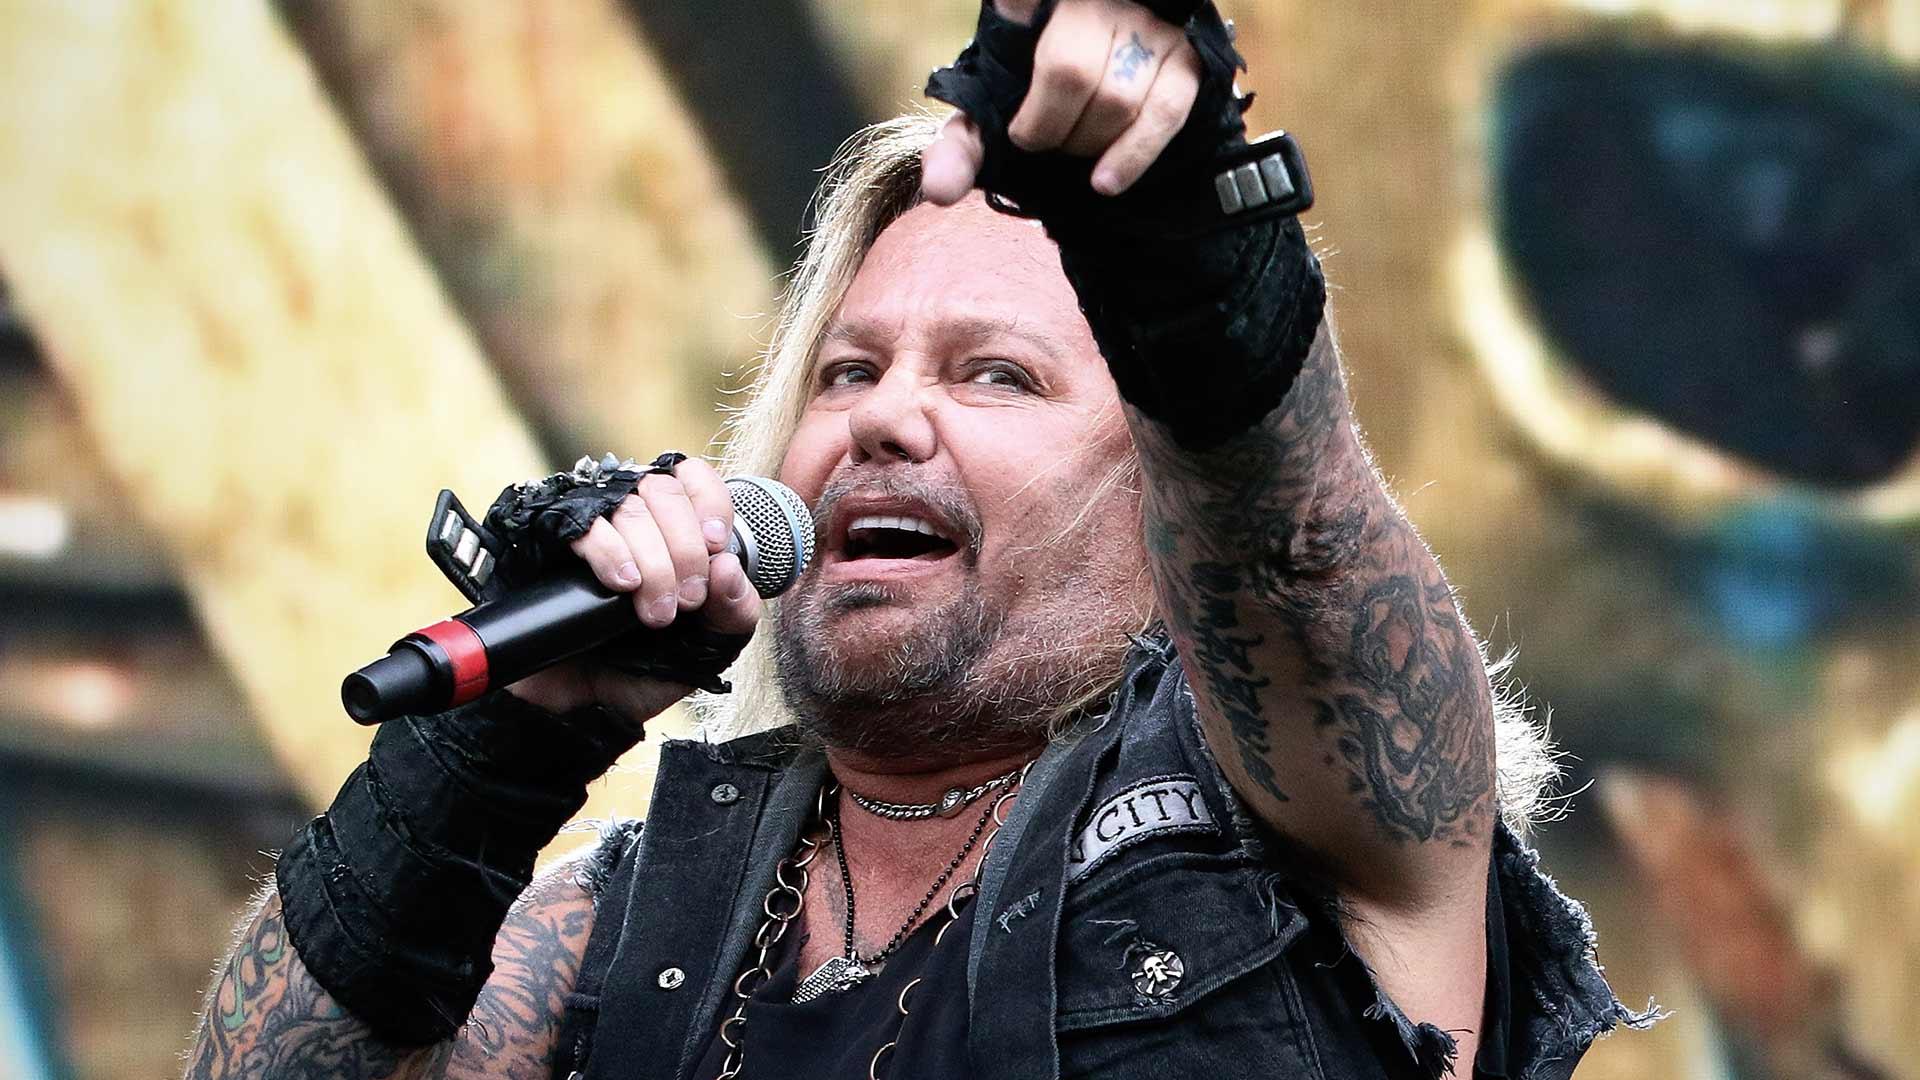 Mötley Crüe Singer Vince Neil Ordered To Cough Up $170,000 to Lawyers in Assault Battle